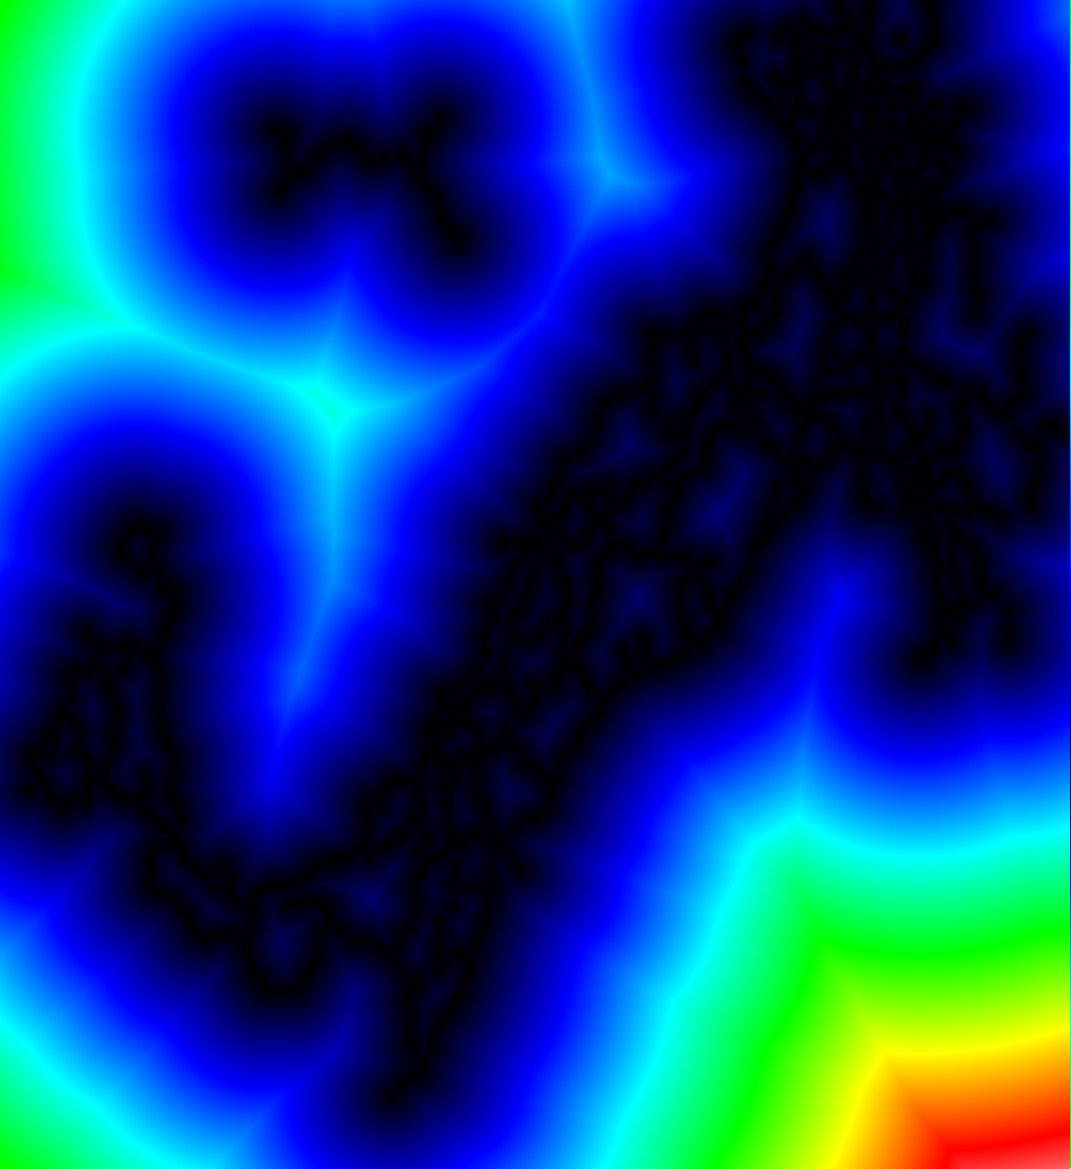 The railway heatmap, deformed and with inverted colors. You can clearly see Italy's shape